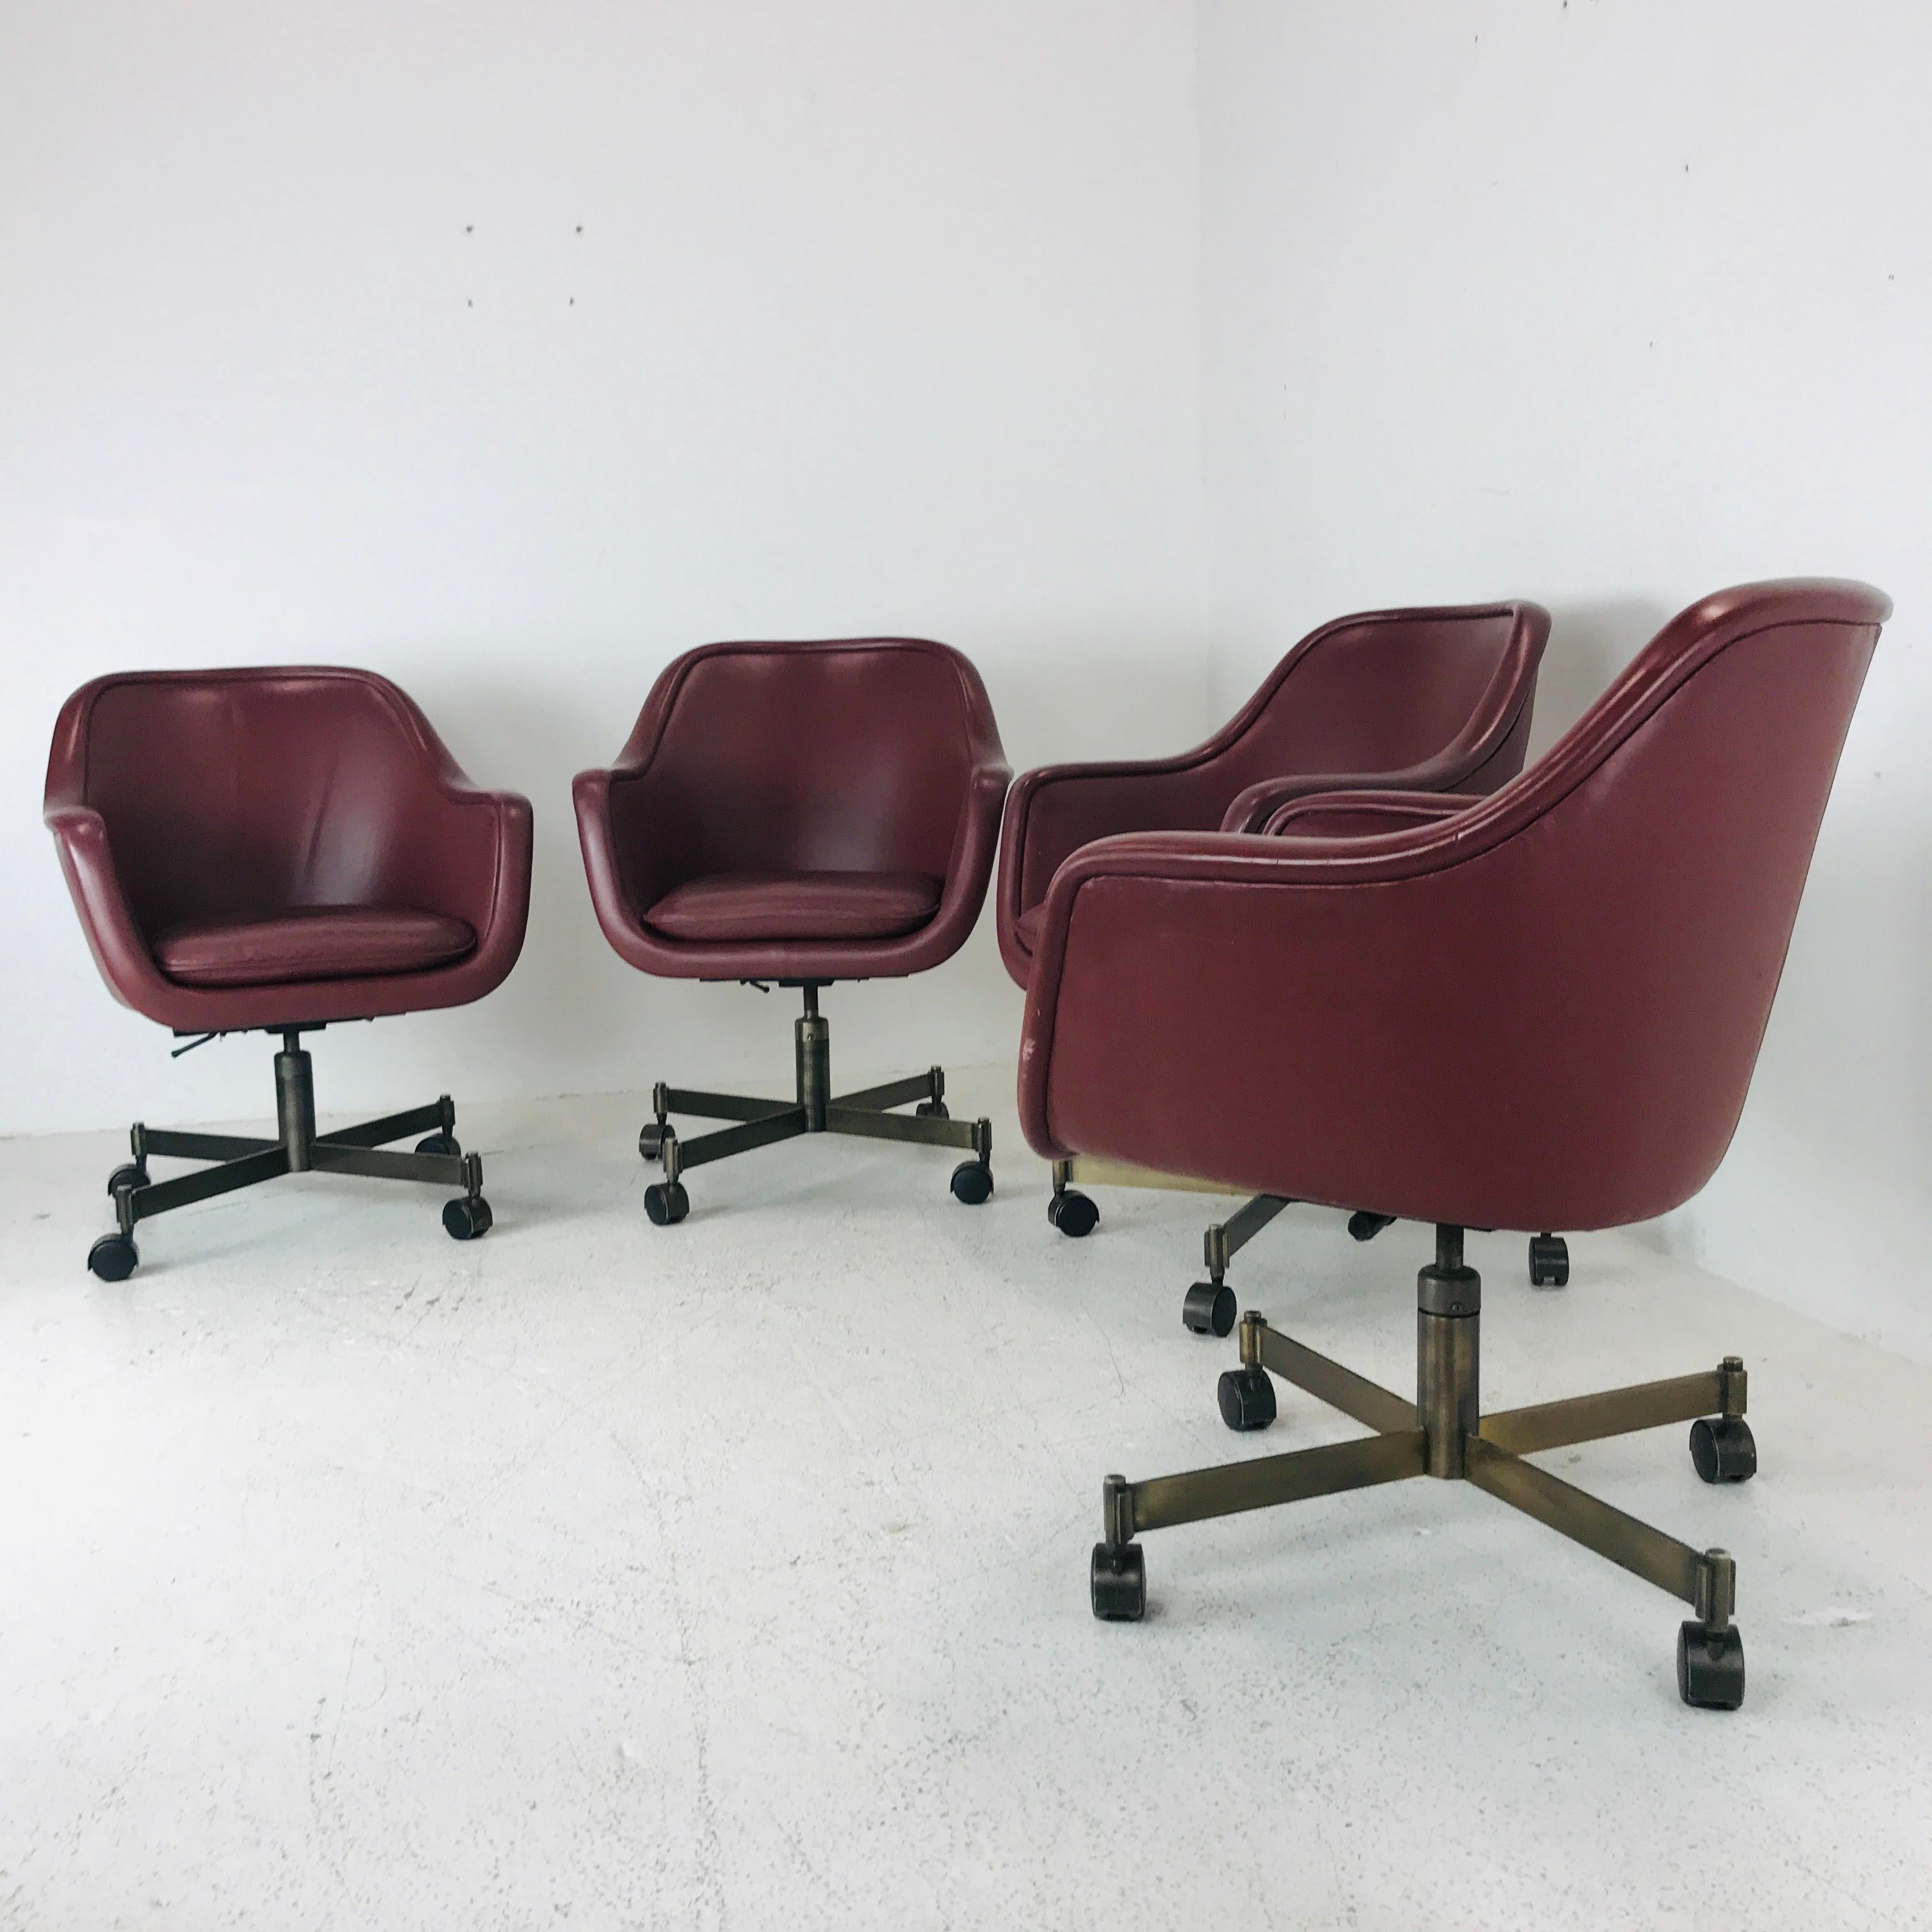 Vintage Ward Bennett office chairs, 4 available.